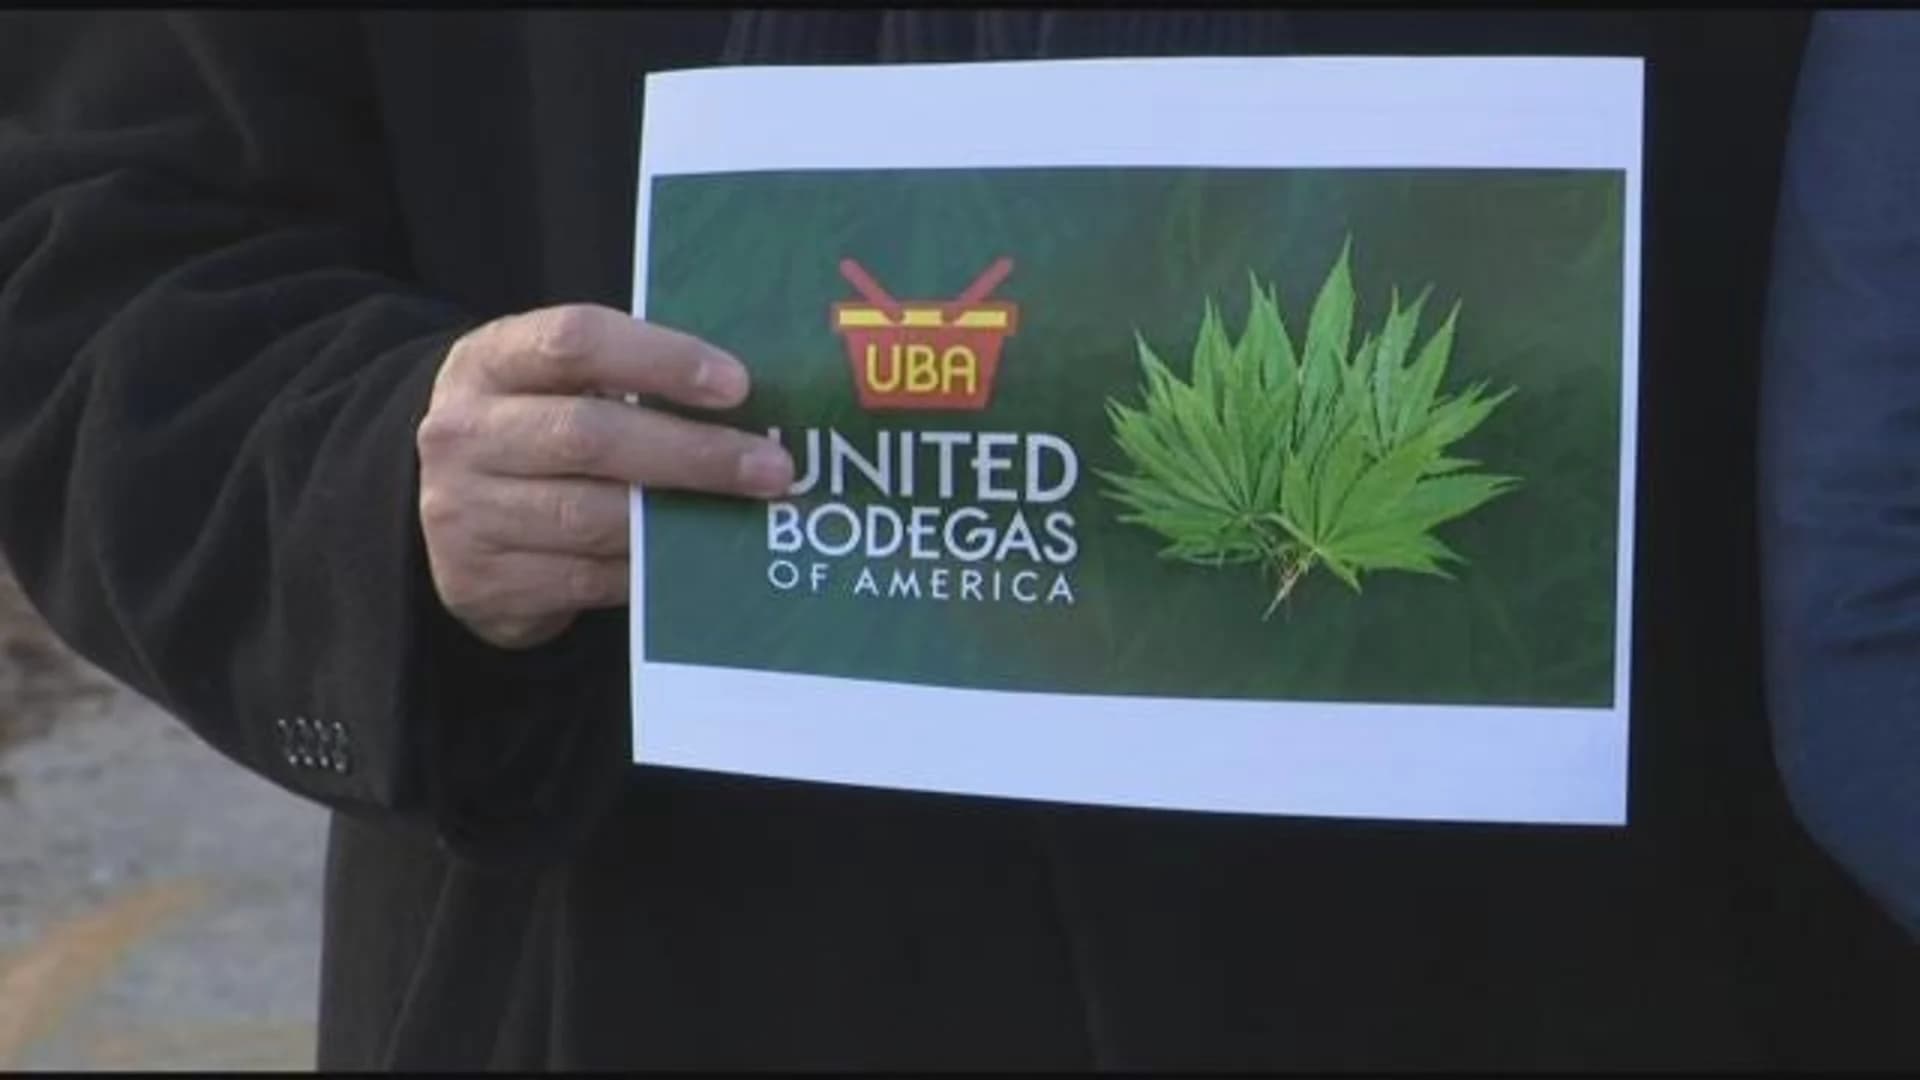 Bodega owners call on politicians to allow sale of marijuana